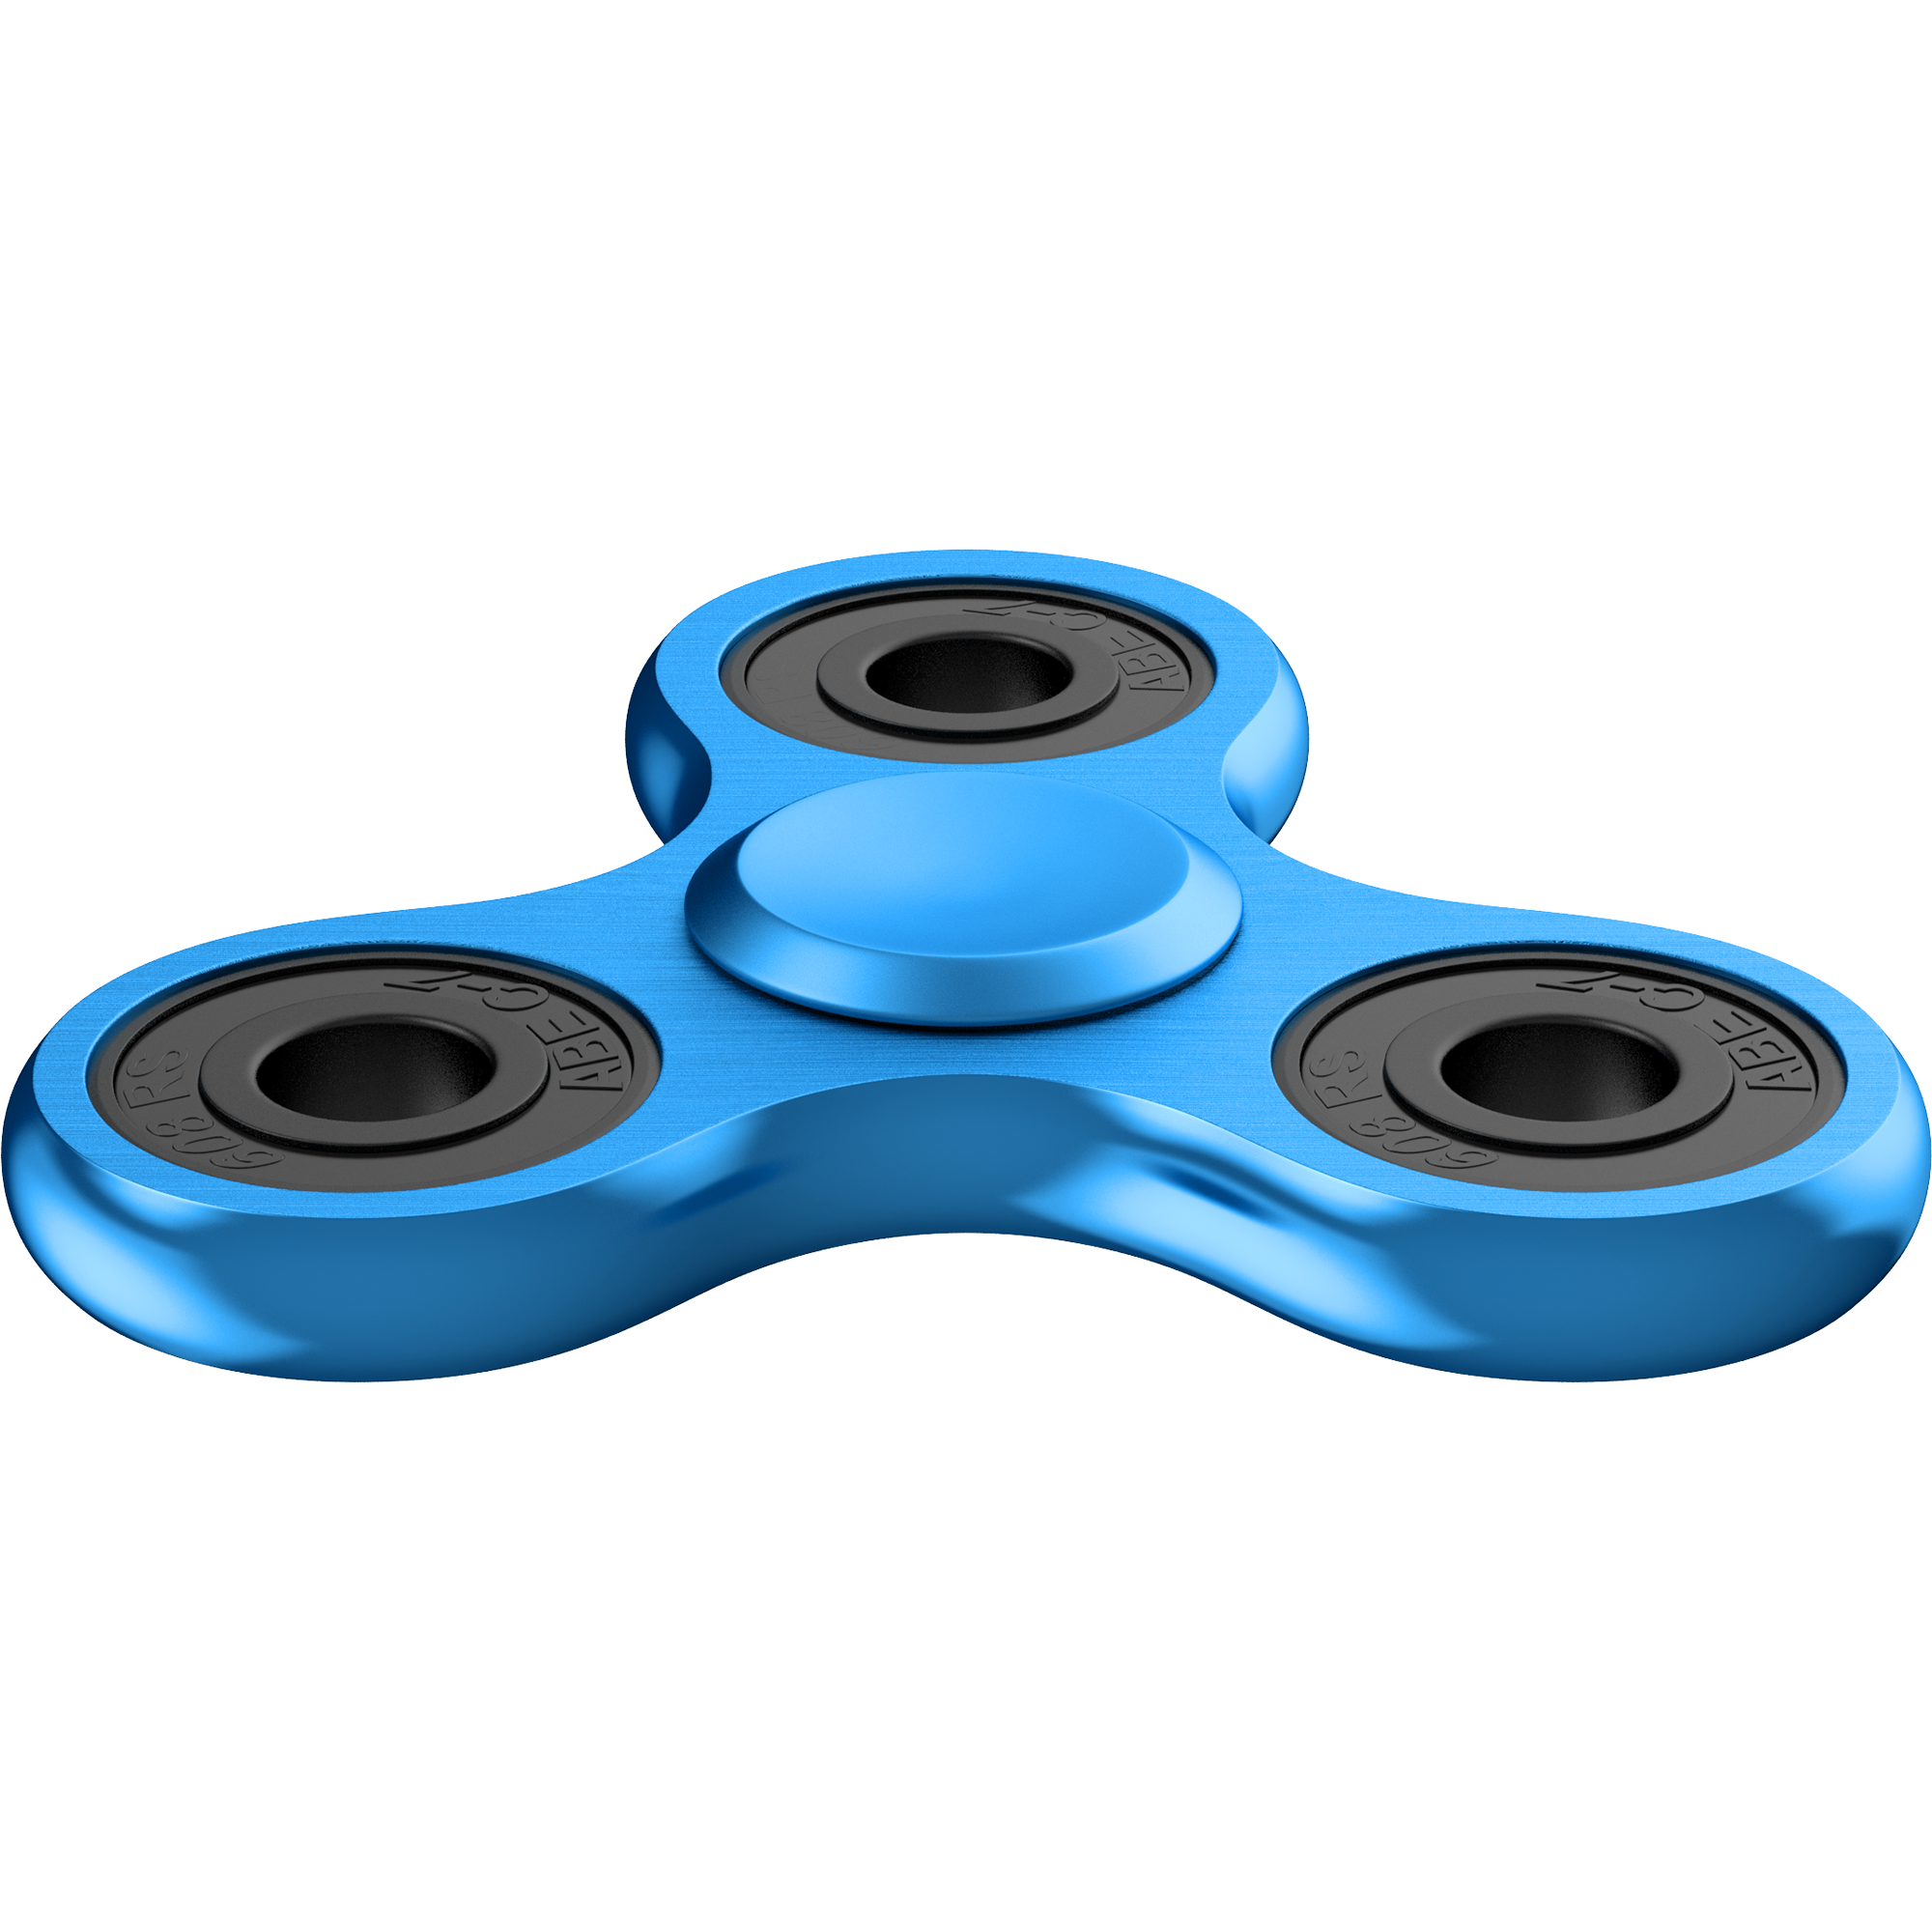 Alloy Blue 360 Spinner Focus Fidget Toy Tri-Spinner Focus Toy for Kids & Adults - image 3 of 5